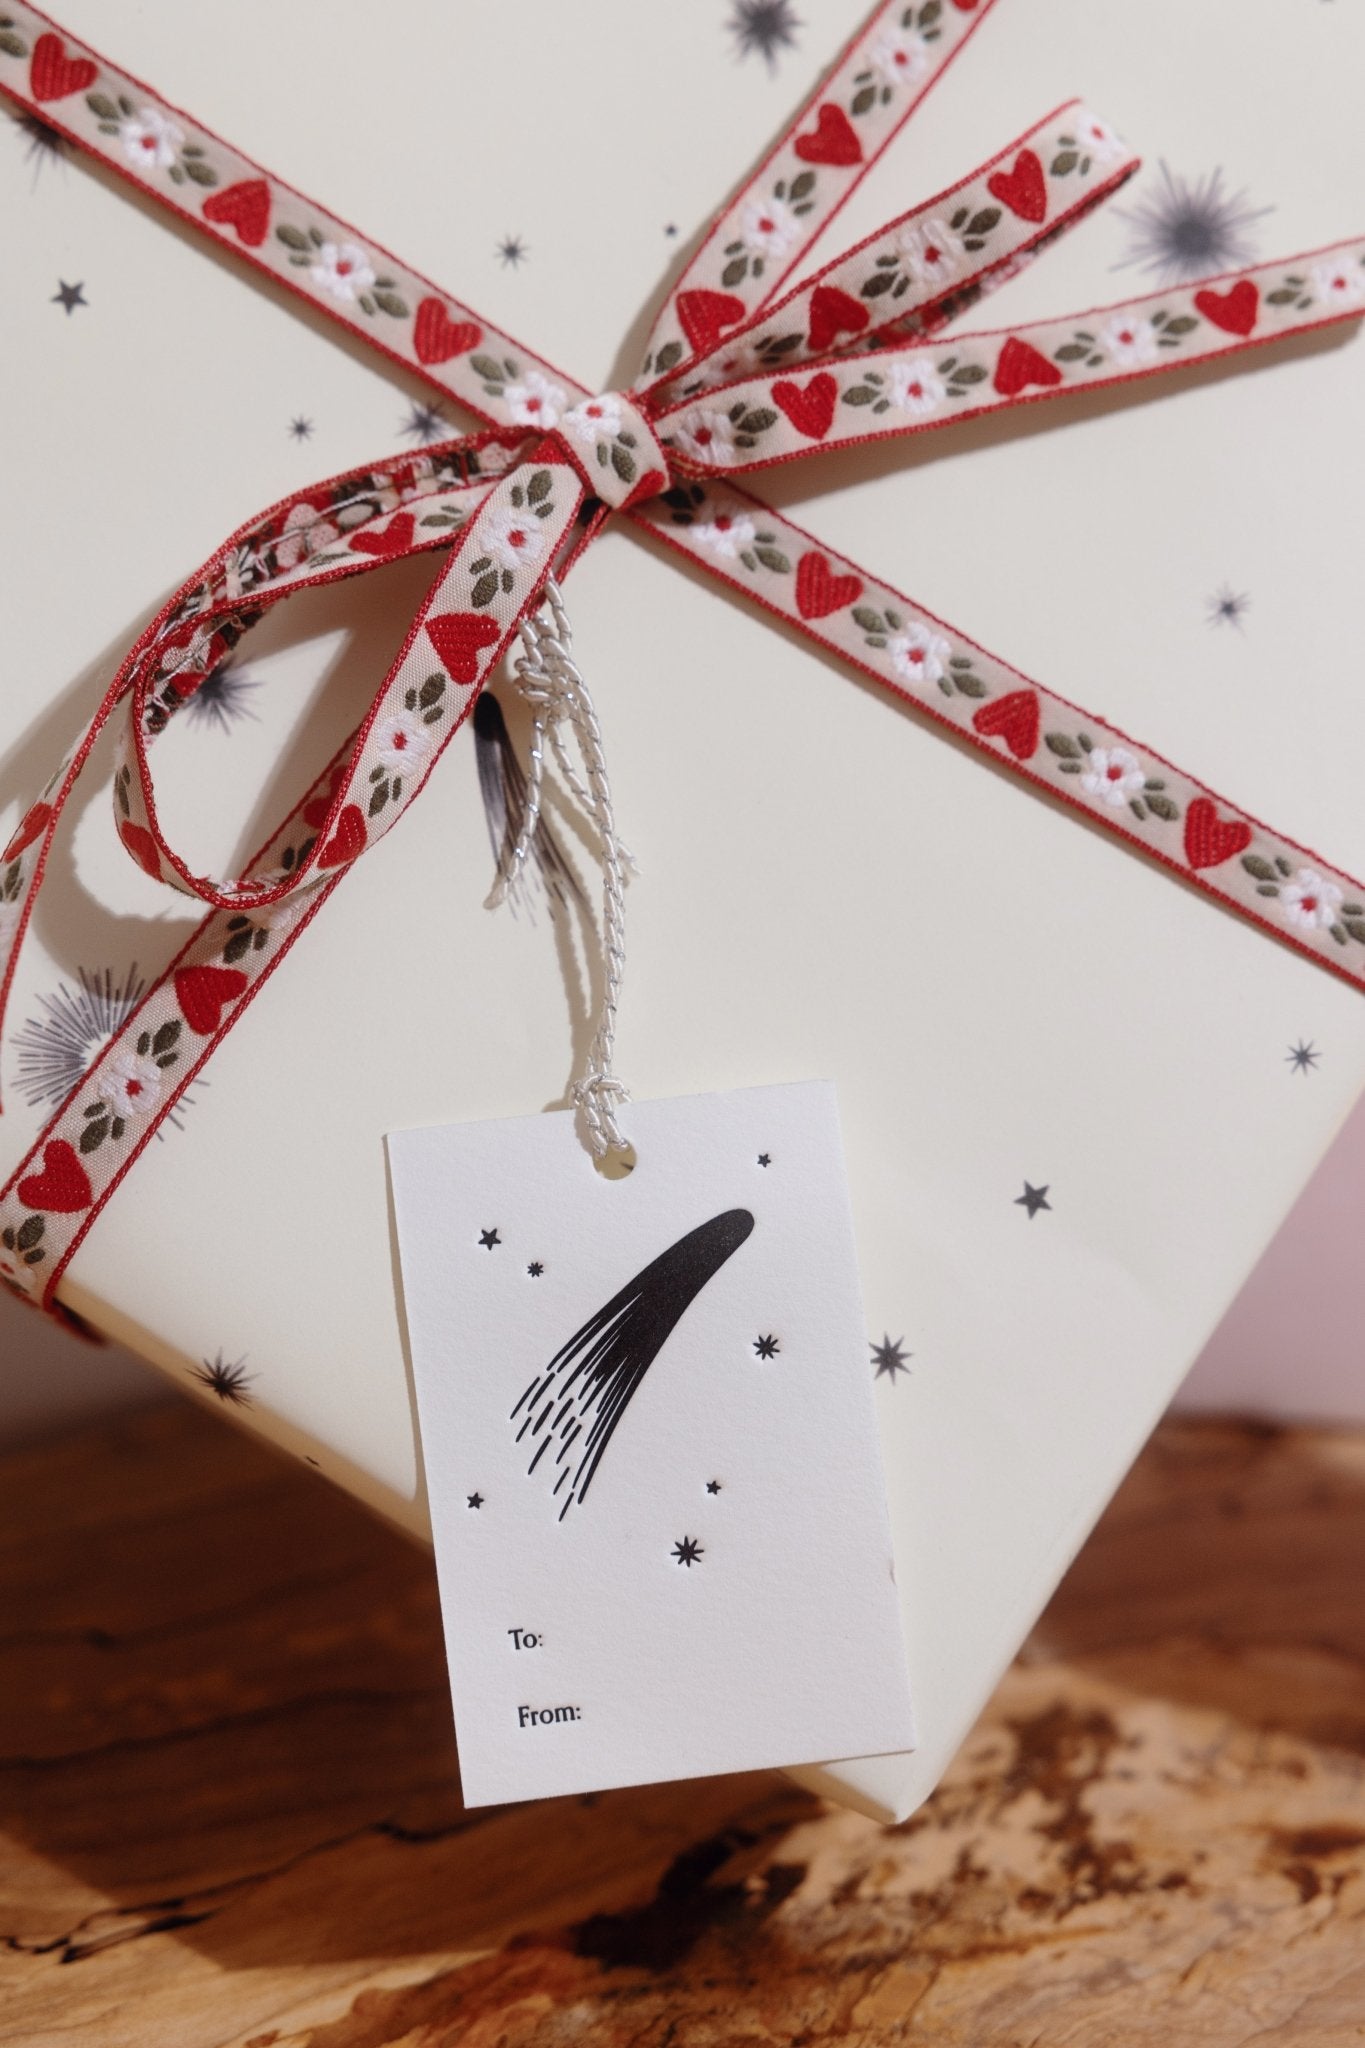 An Adelfi letterpressed gift tag with black comets, stars, and the words &quot;to&quot; and &quot;from&quot; in black ink on cream card stock attached by silver string to a present wrapped in cream and black comets Adelfi gift wrap with red hearts ribbon.